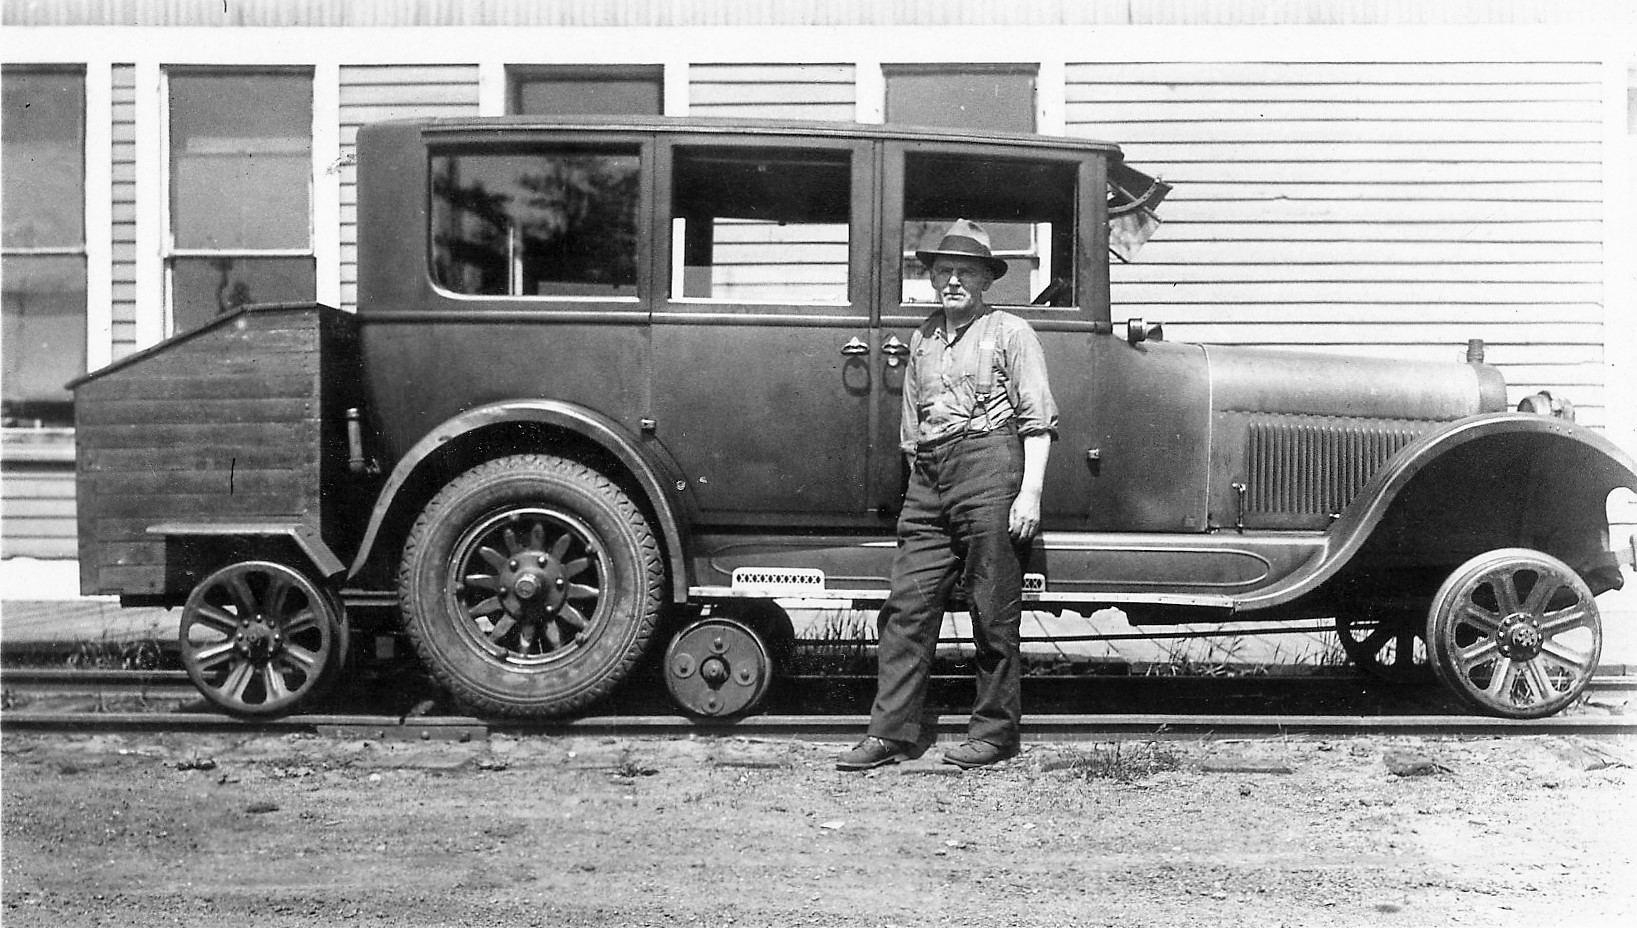 1930s photo of Vern Niles standing by the 1923 Buick sedan redesigned as a railroad mail car by the M. & LS Raiload. Niles/Helmka Family Collection 